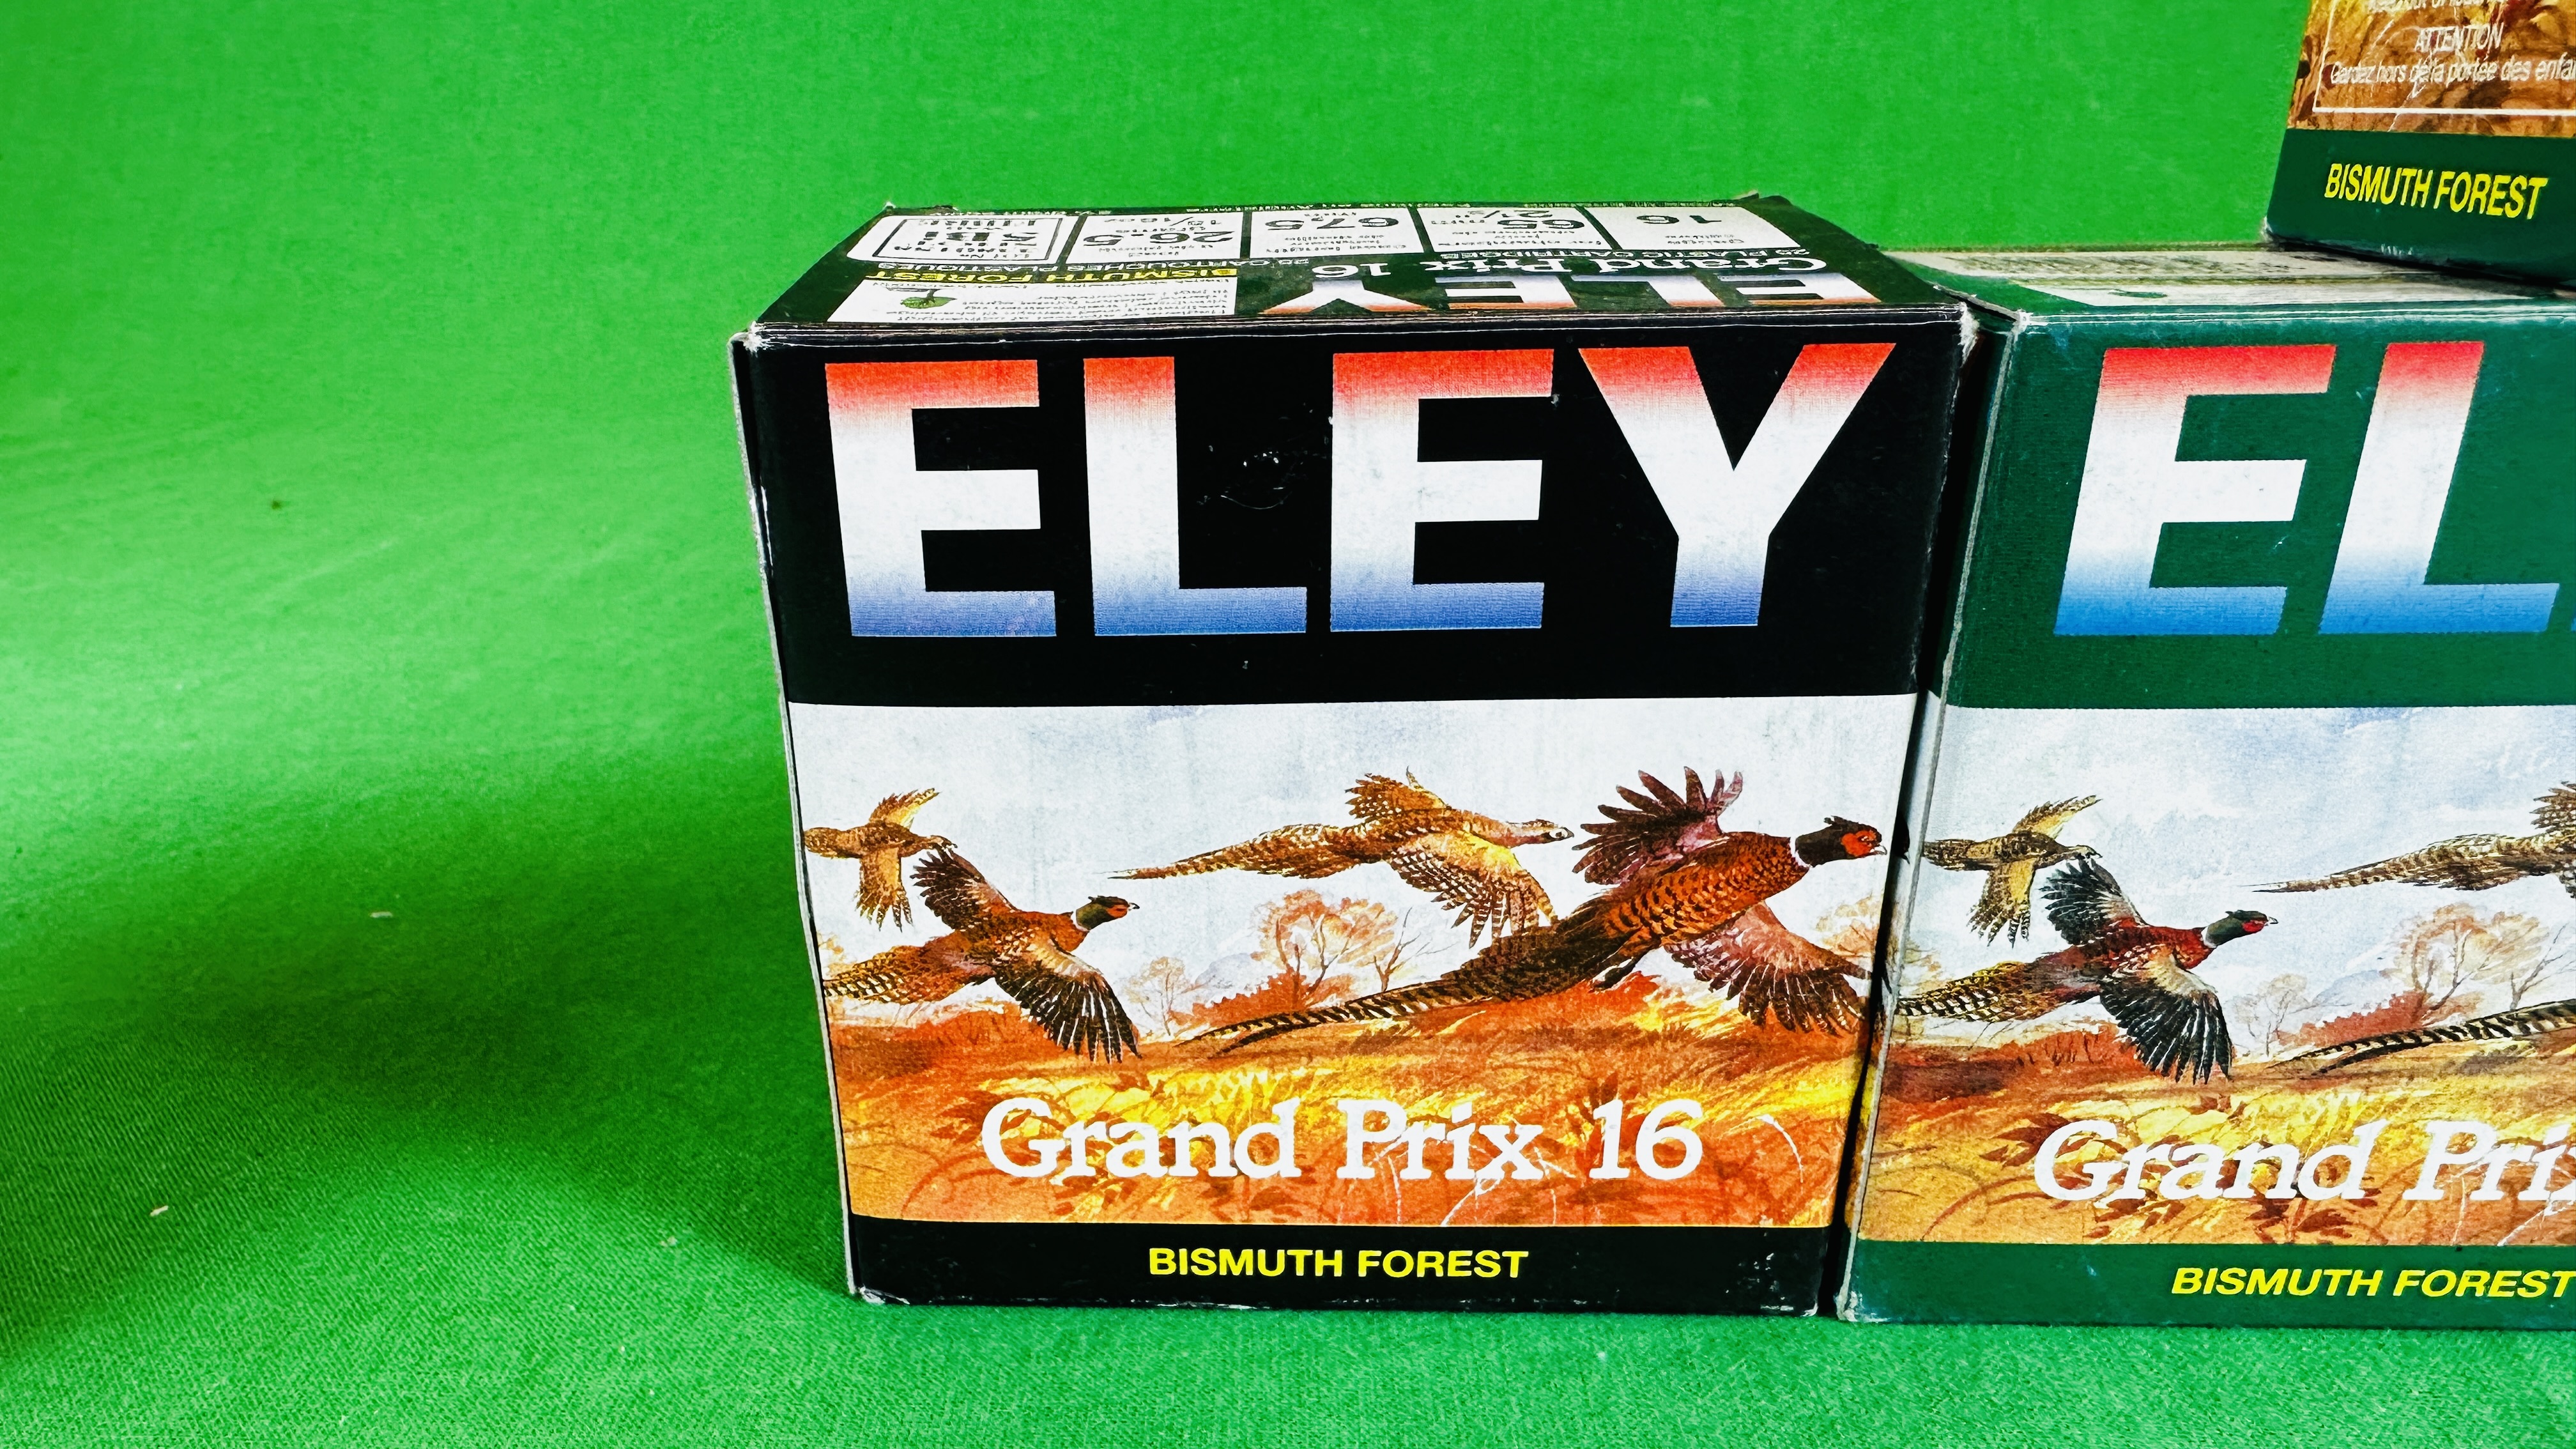 175 X 16 GAUGE ELEY GRAND PRIX BISMUTH FOREST CARTRIDGES - (TO BE COLLECTED IN PERSON BY LICENCE - Image 5 of 5